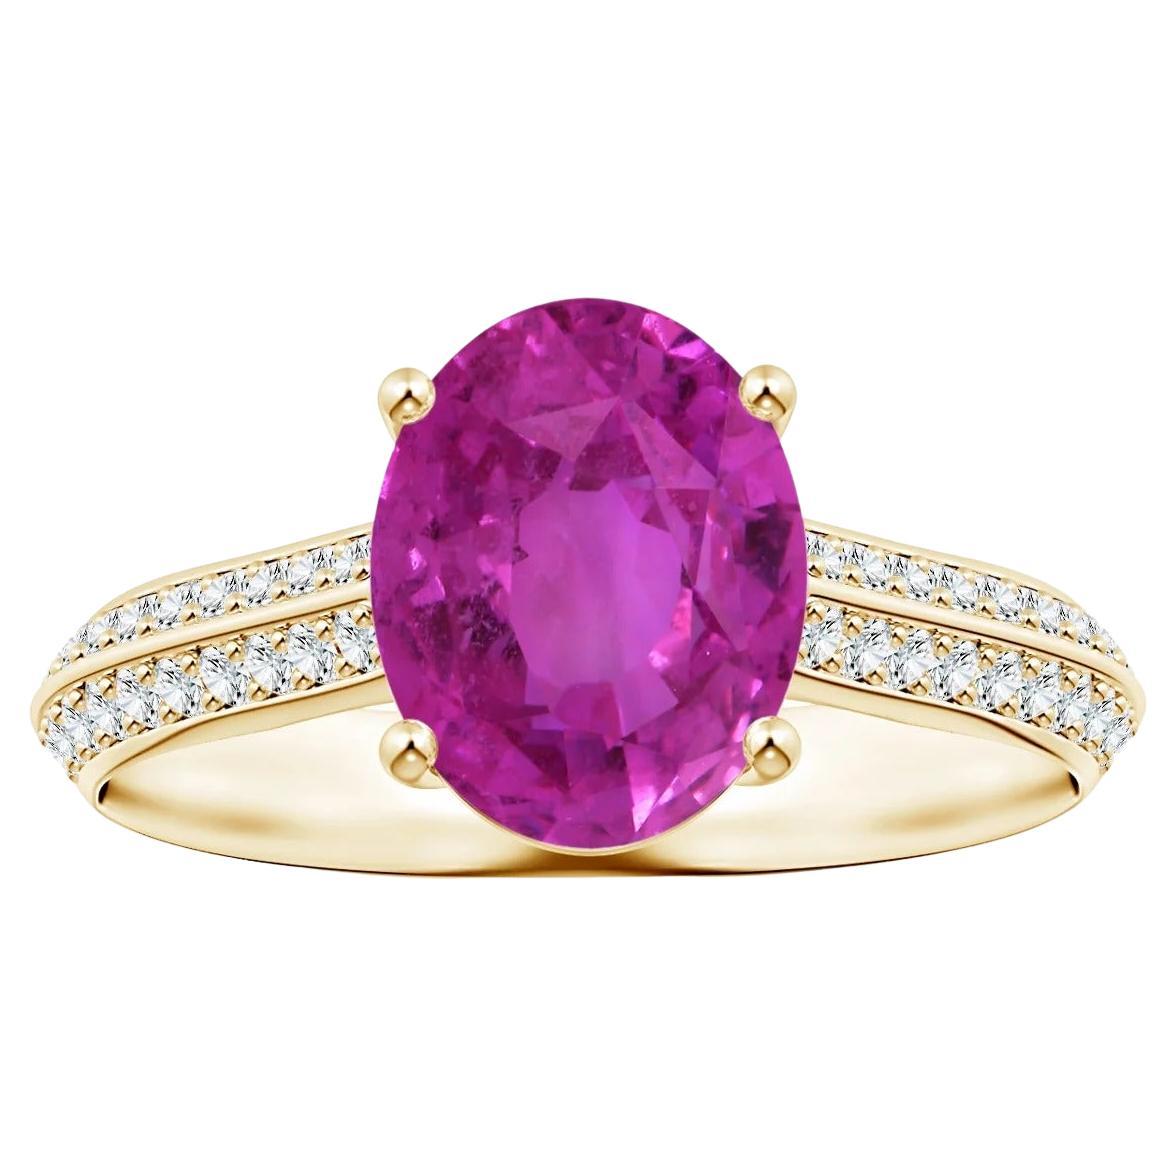 For Sale:  ANGARA GIA Certified Pink Sapphire Knife Edge Ring in Yellow Gold with Diamonds